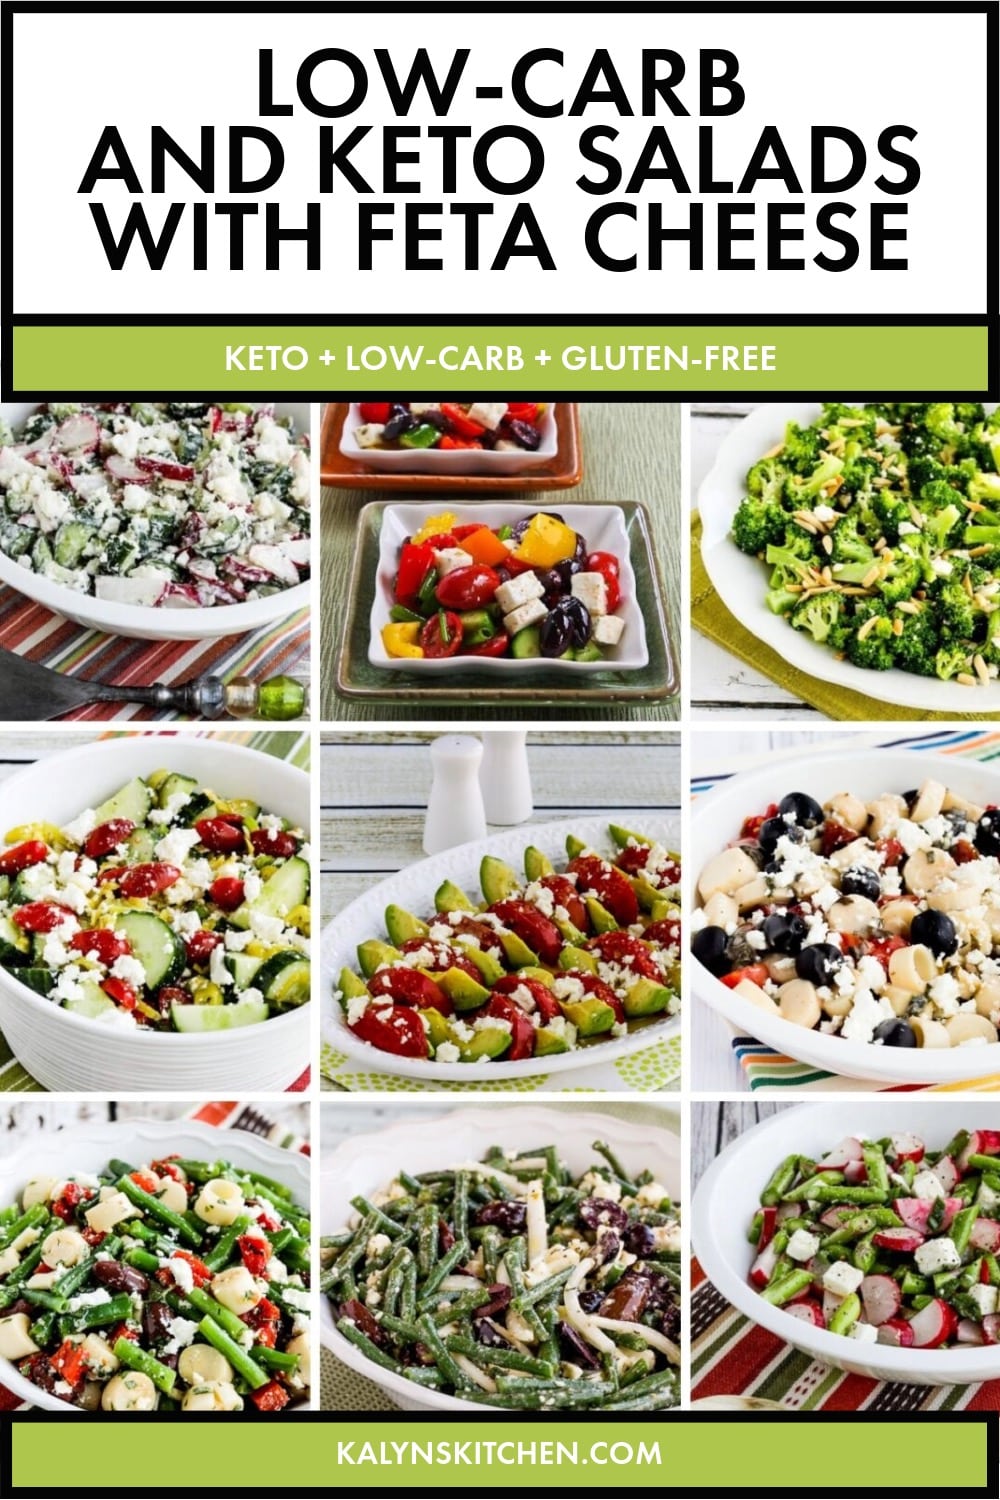 Pinterest image of Low-Carb and Keto Salads with Feta Cheese